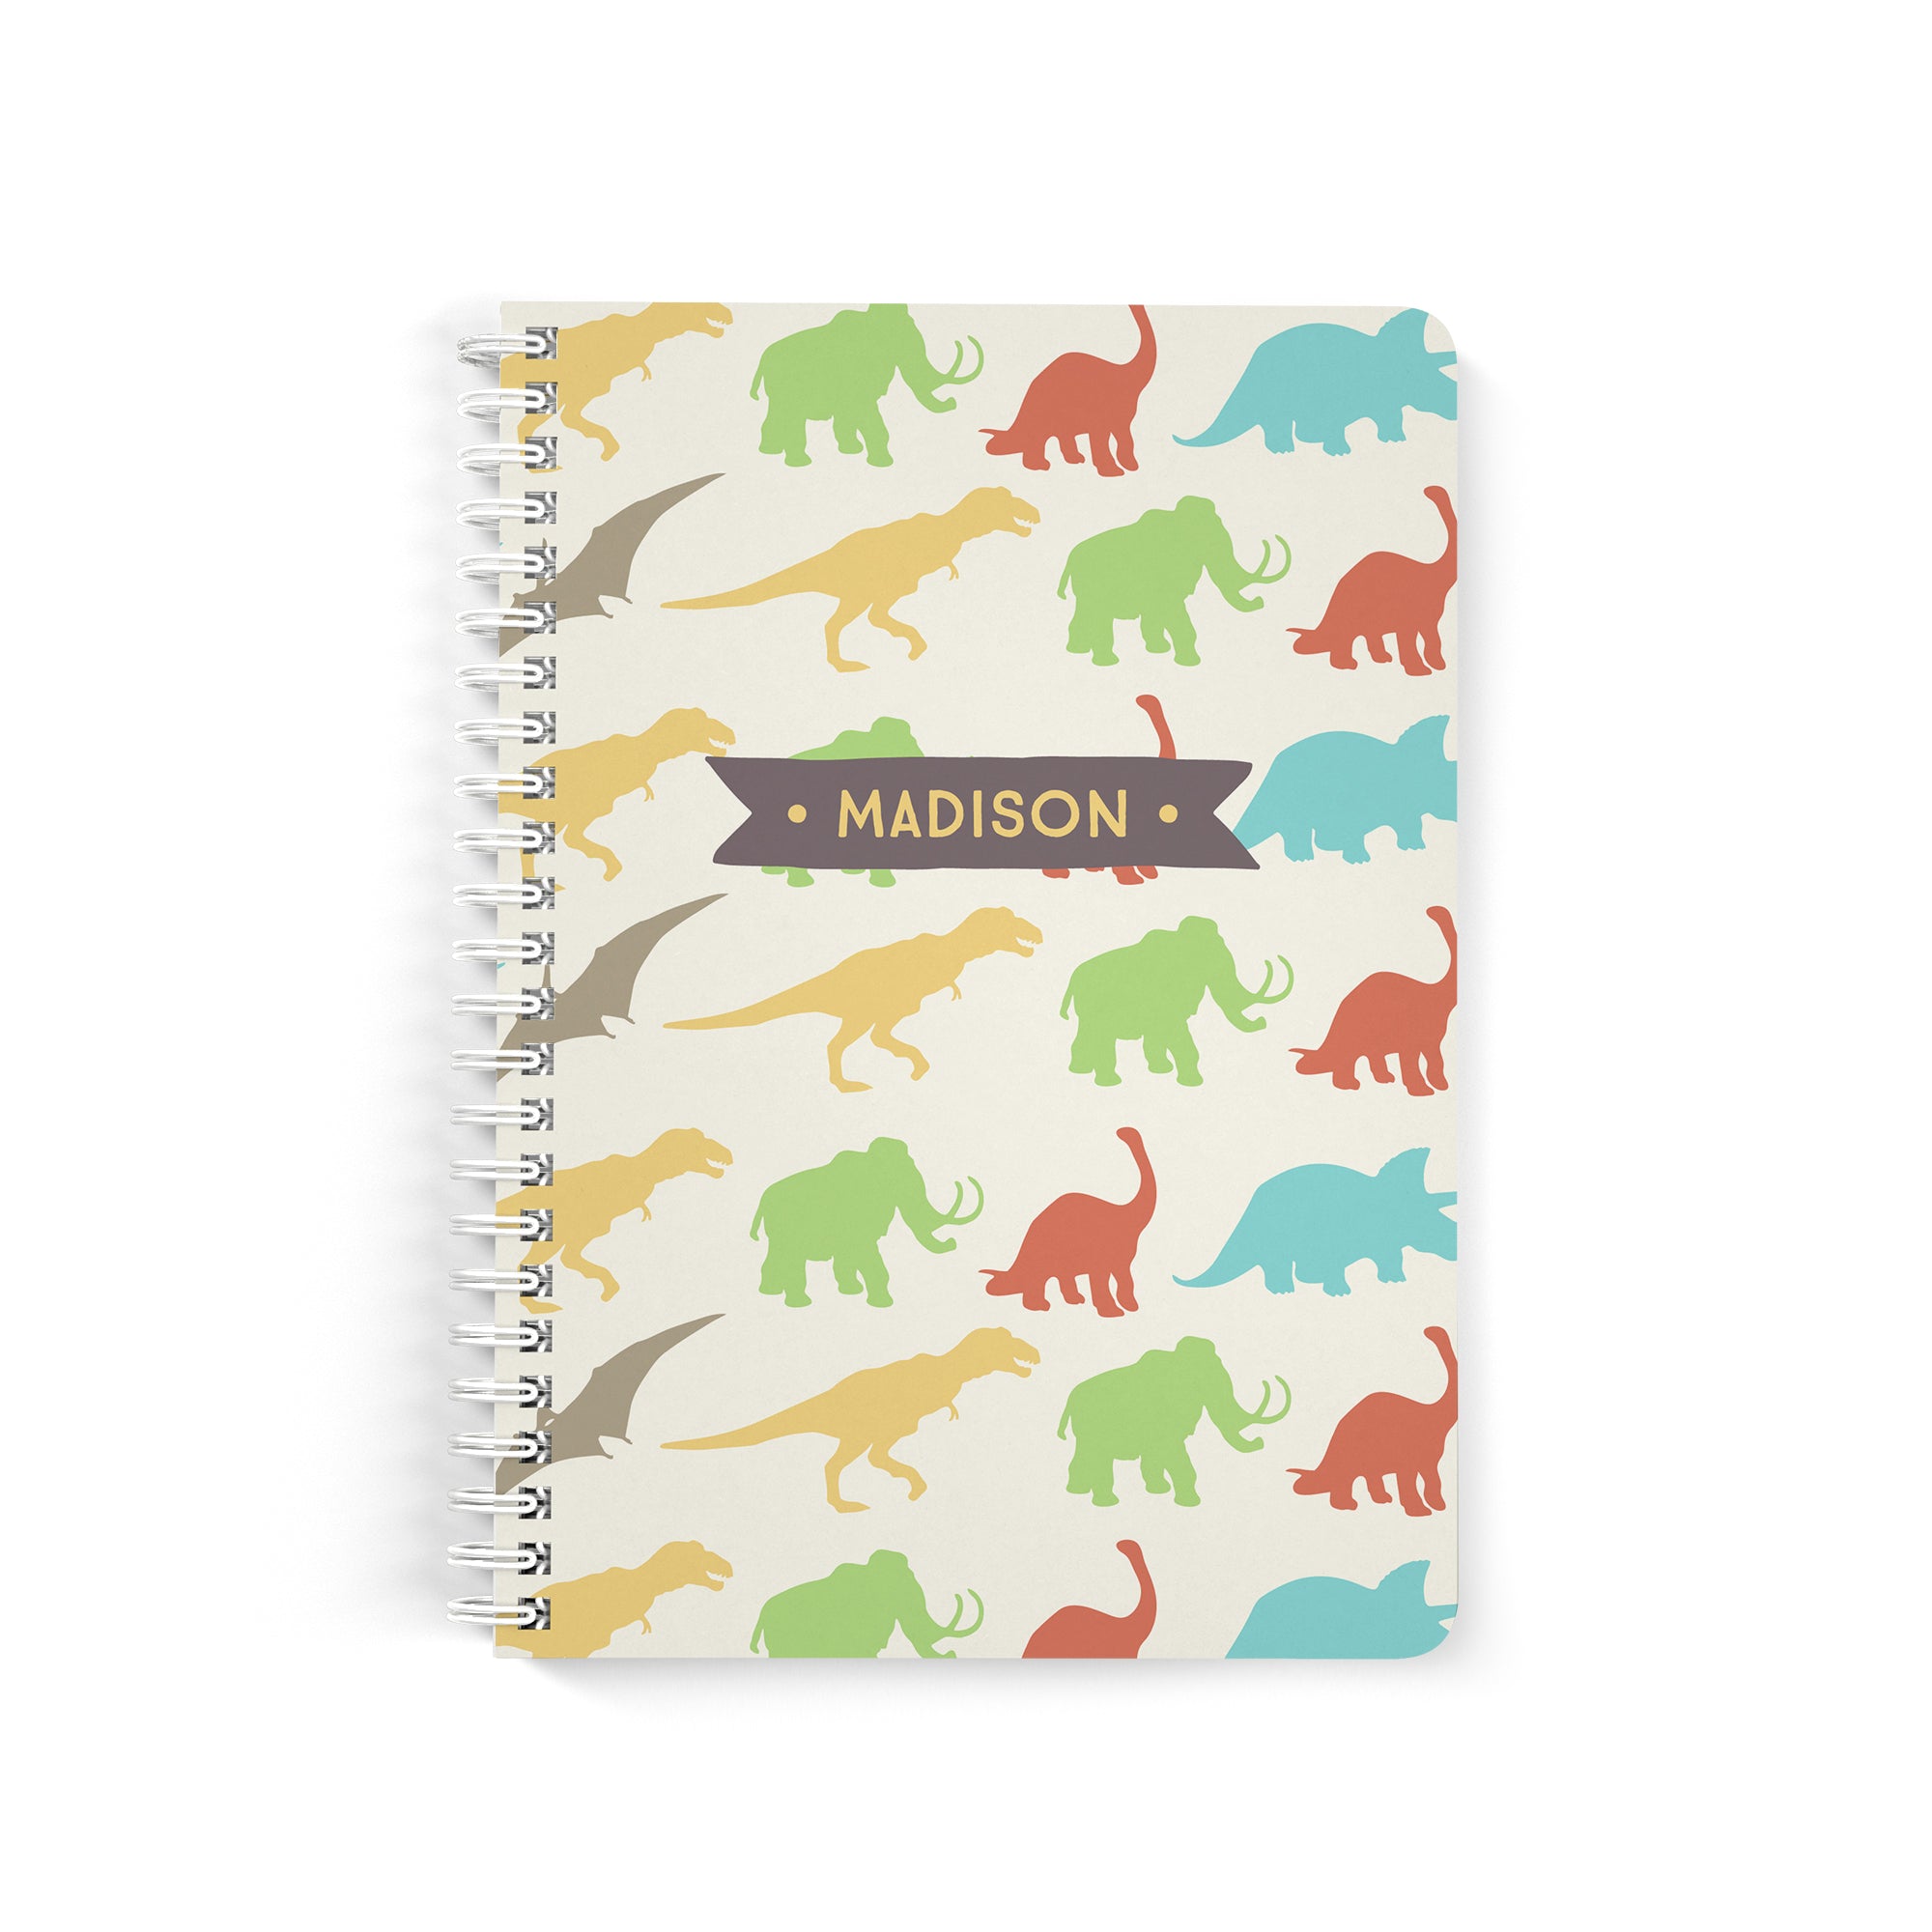 Dinosaur Notebook for Kids, Personalized, Soft cover with Lined Pages ...